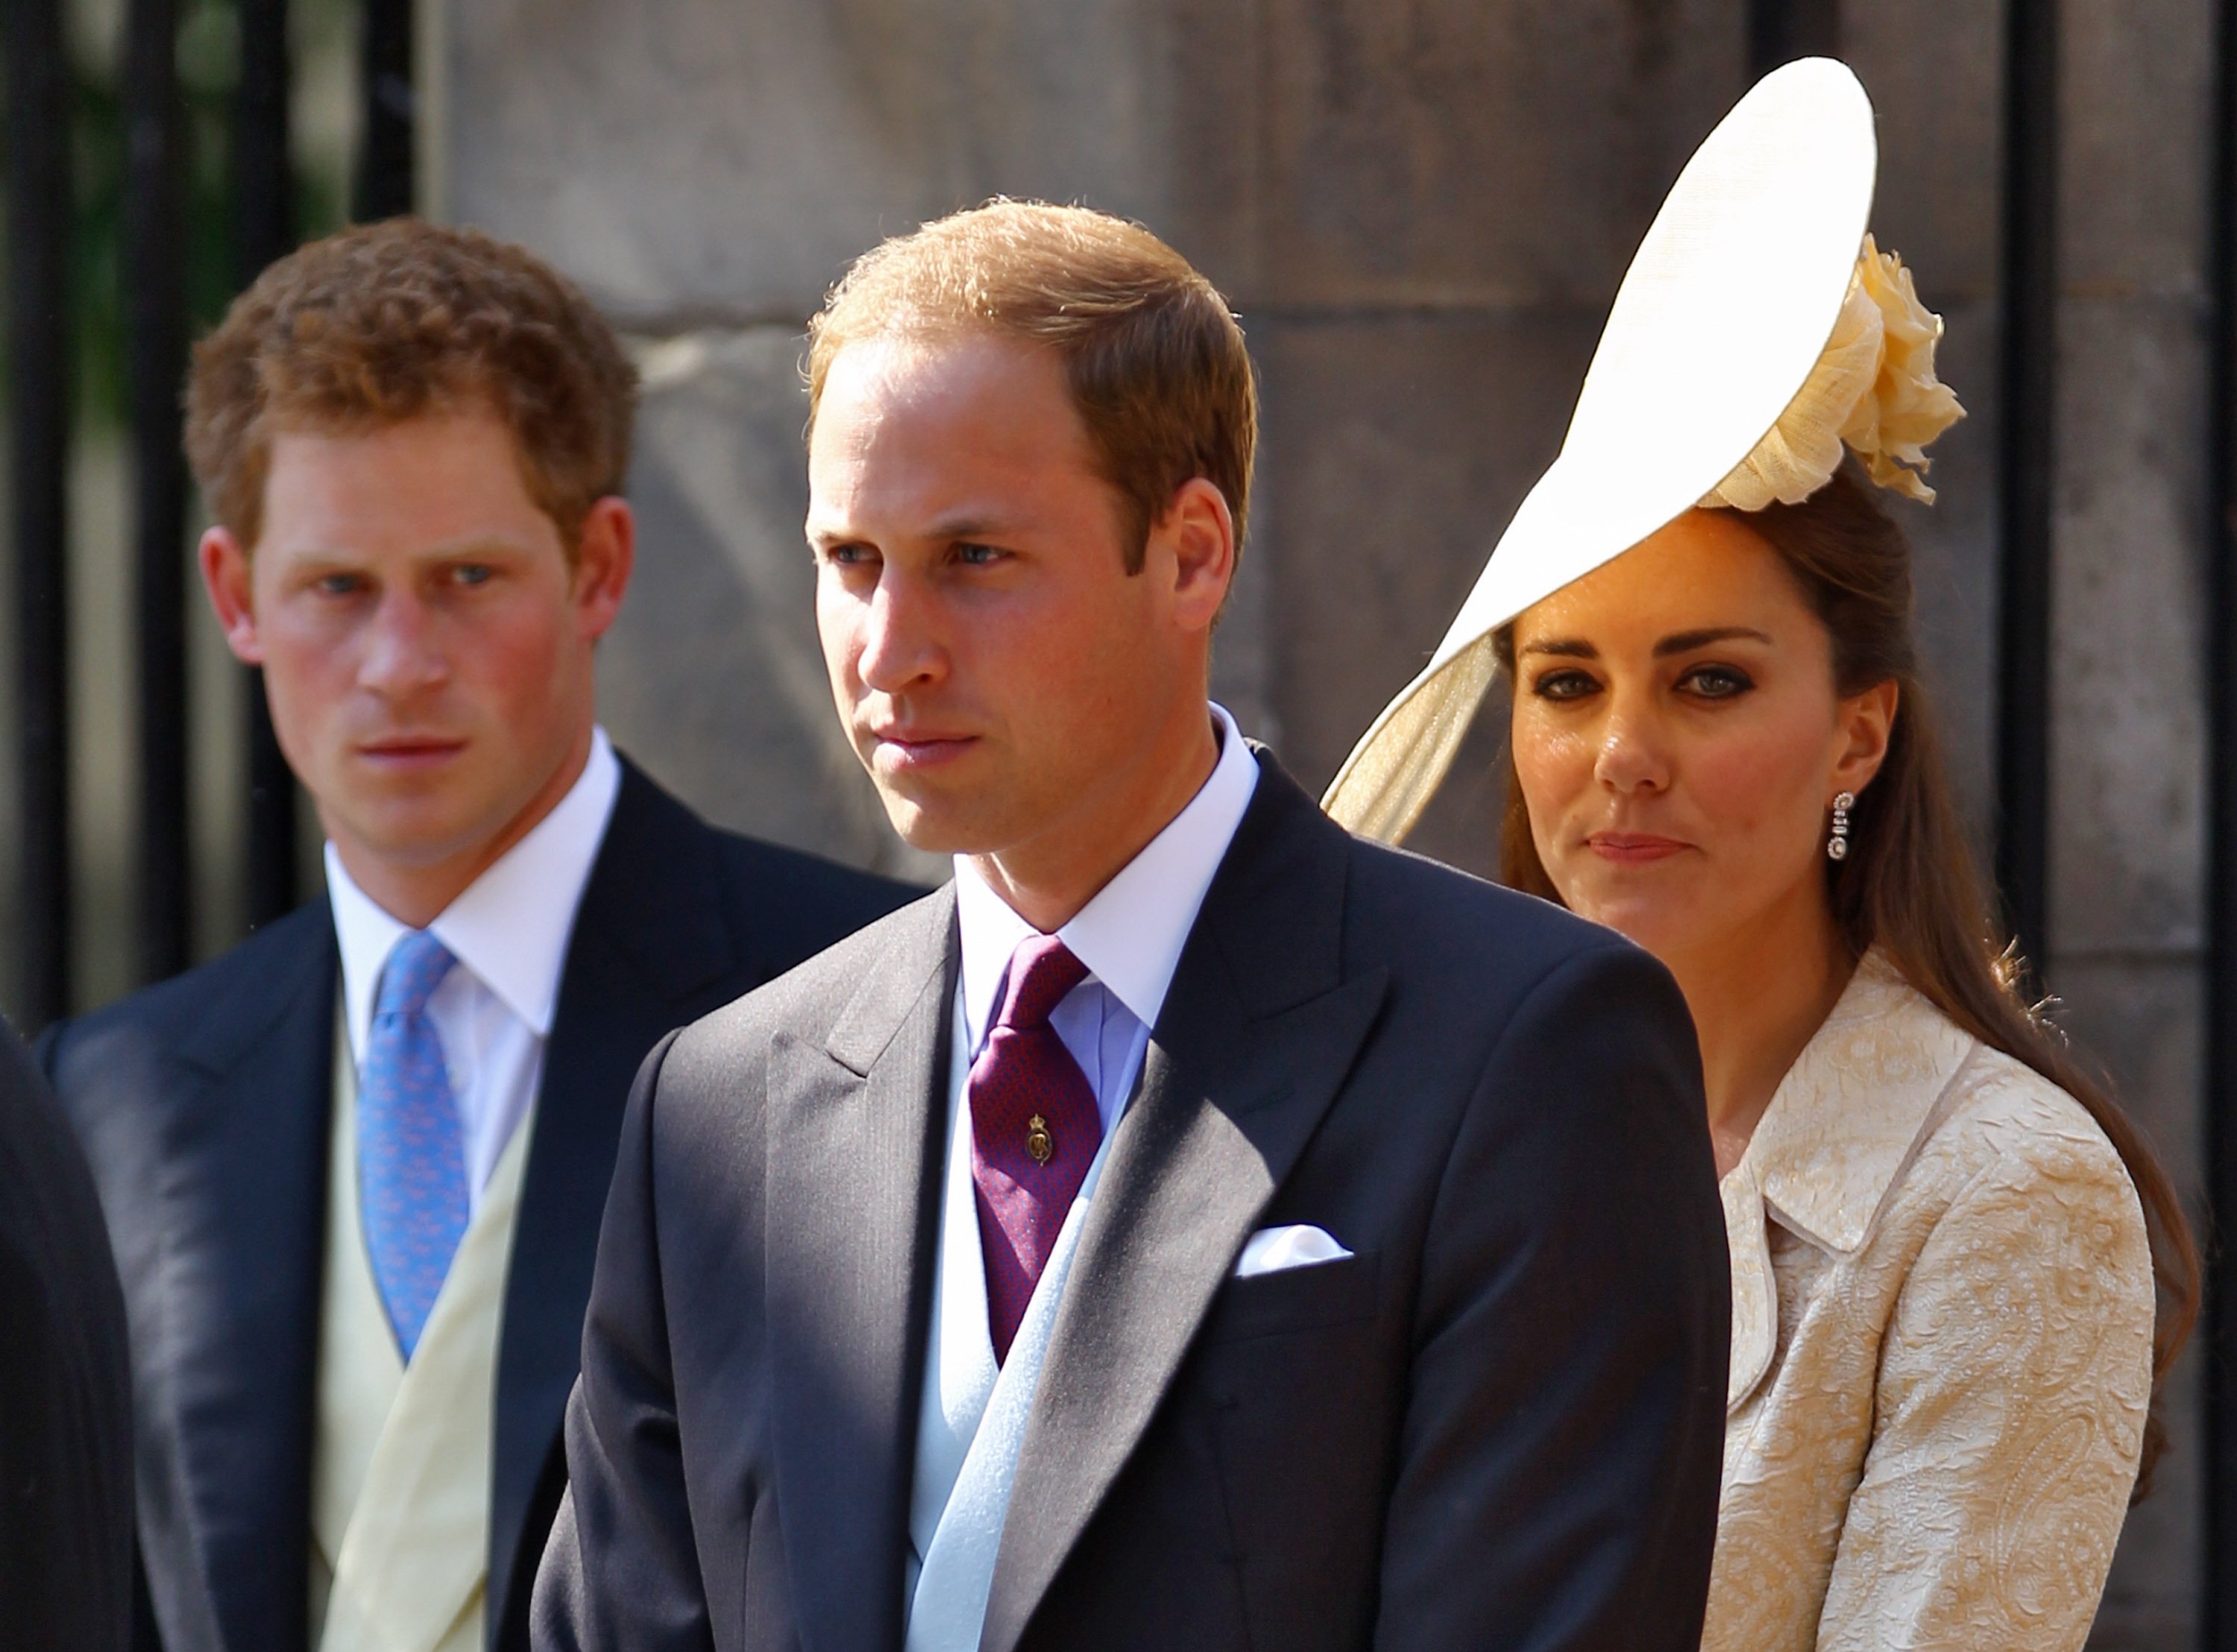 Prince Harry, Prince William, and Kate Middleton | Photo: Getty Images